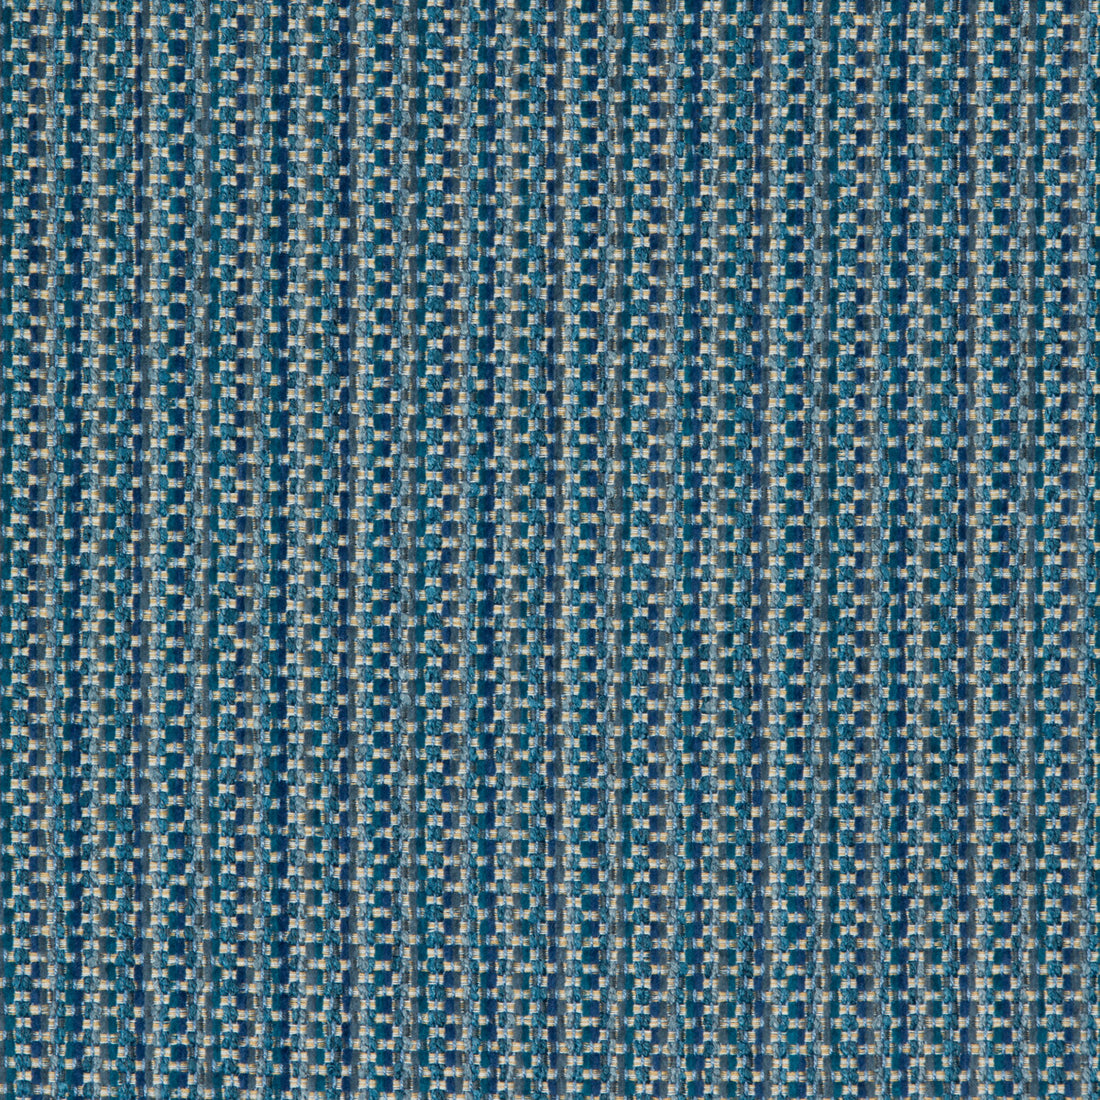 Kravet Contract fabric in 35032-515 color - pattern 35032.515.0 - by Kravet Contract in the Incase Crypton Gis collection